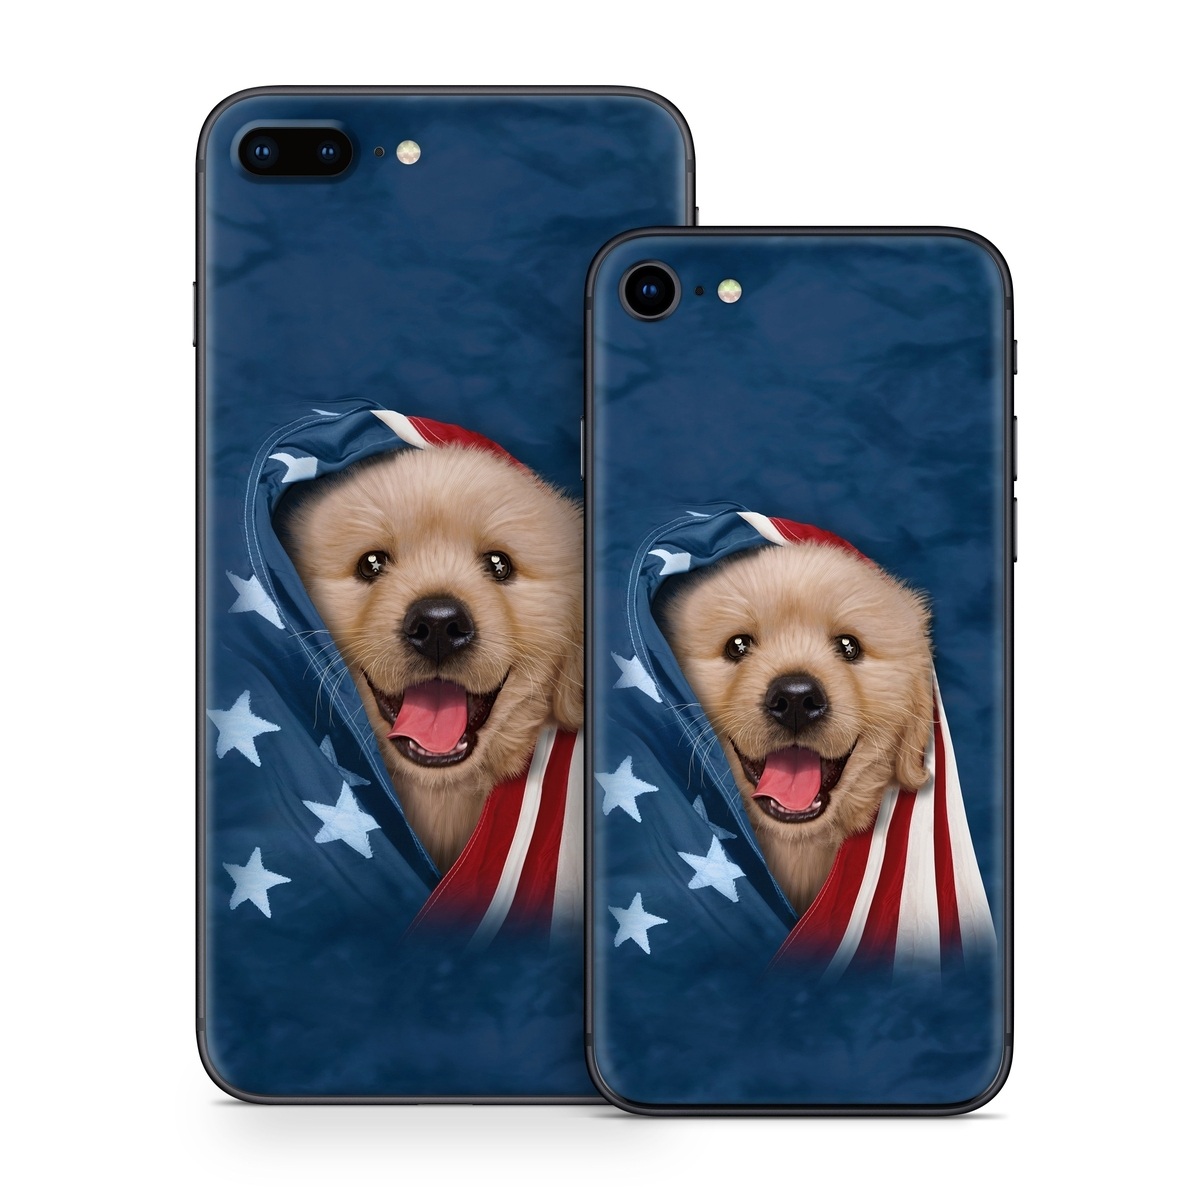 iPhone 8 Series Skin design of Dog, Canidae, Mammal, Dog breed, Carnivore, Puppy, Snout, Companion dog, Sporting Group, Pomeranian, with yellow, black, brown, white, blue, red colors